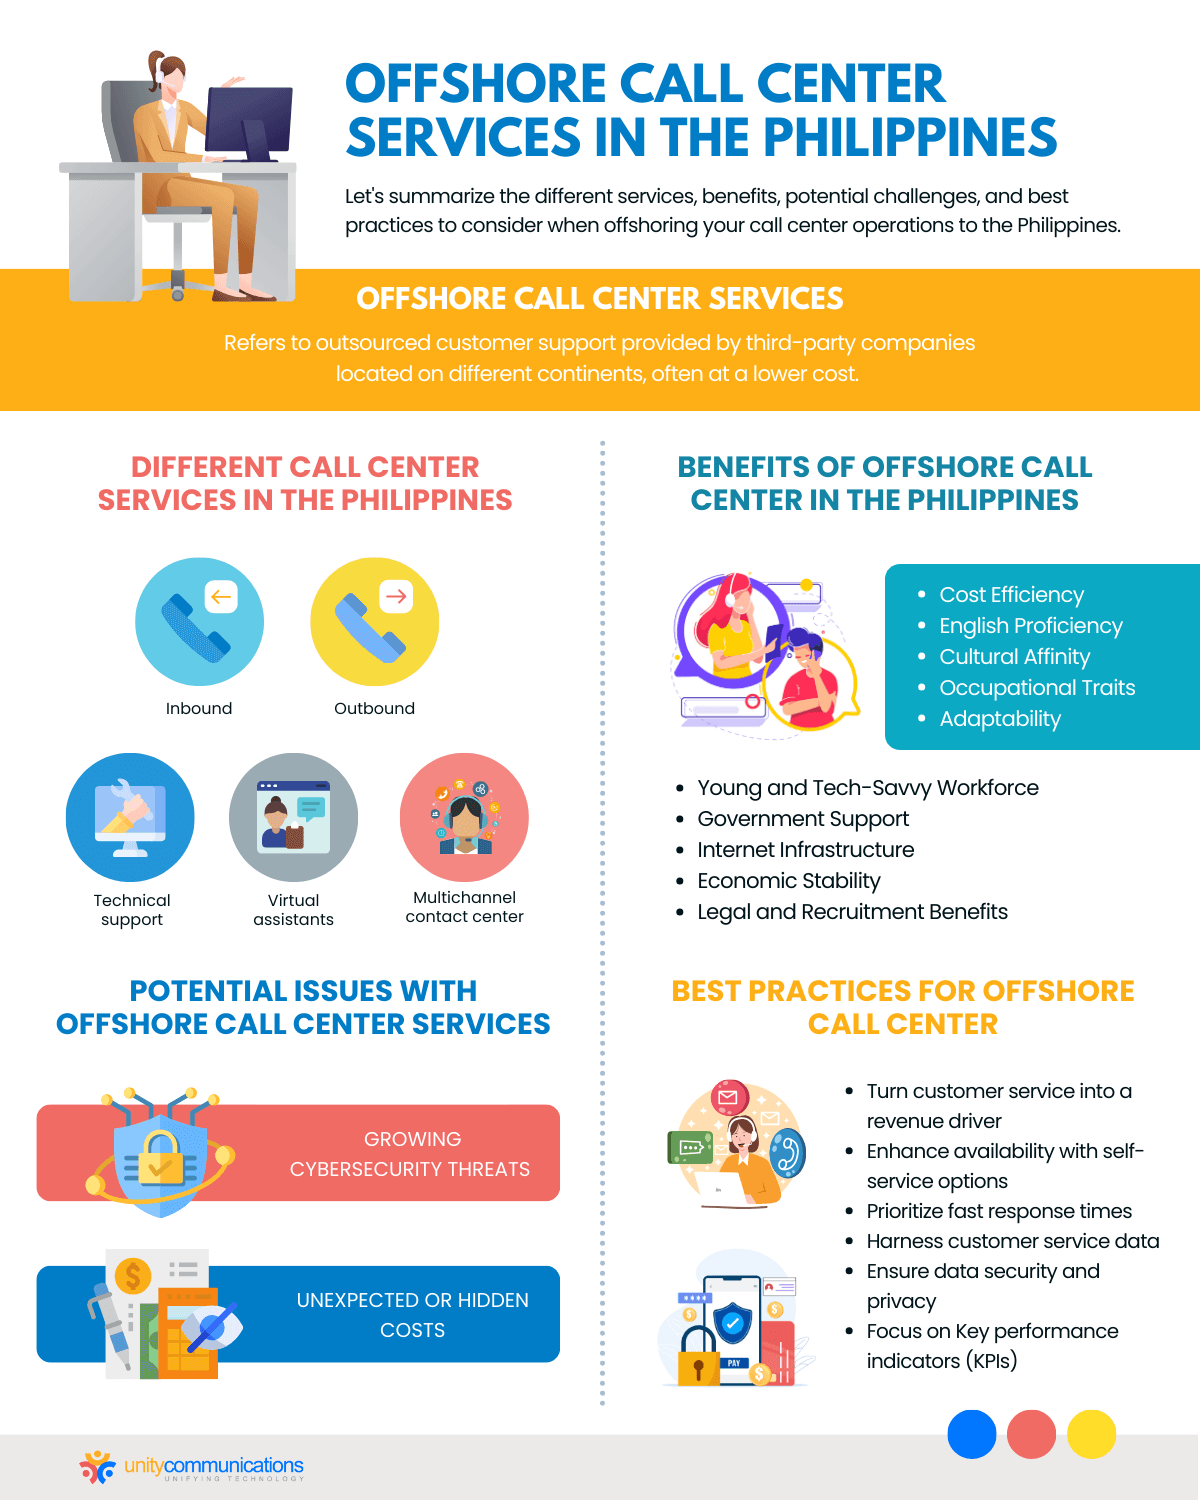 Offshore Call Center Services in the Philippines